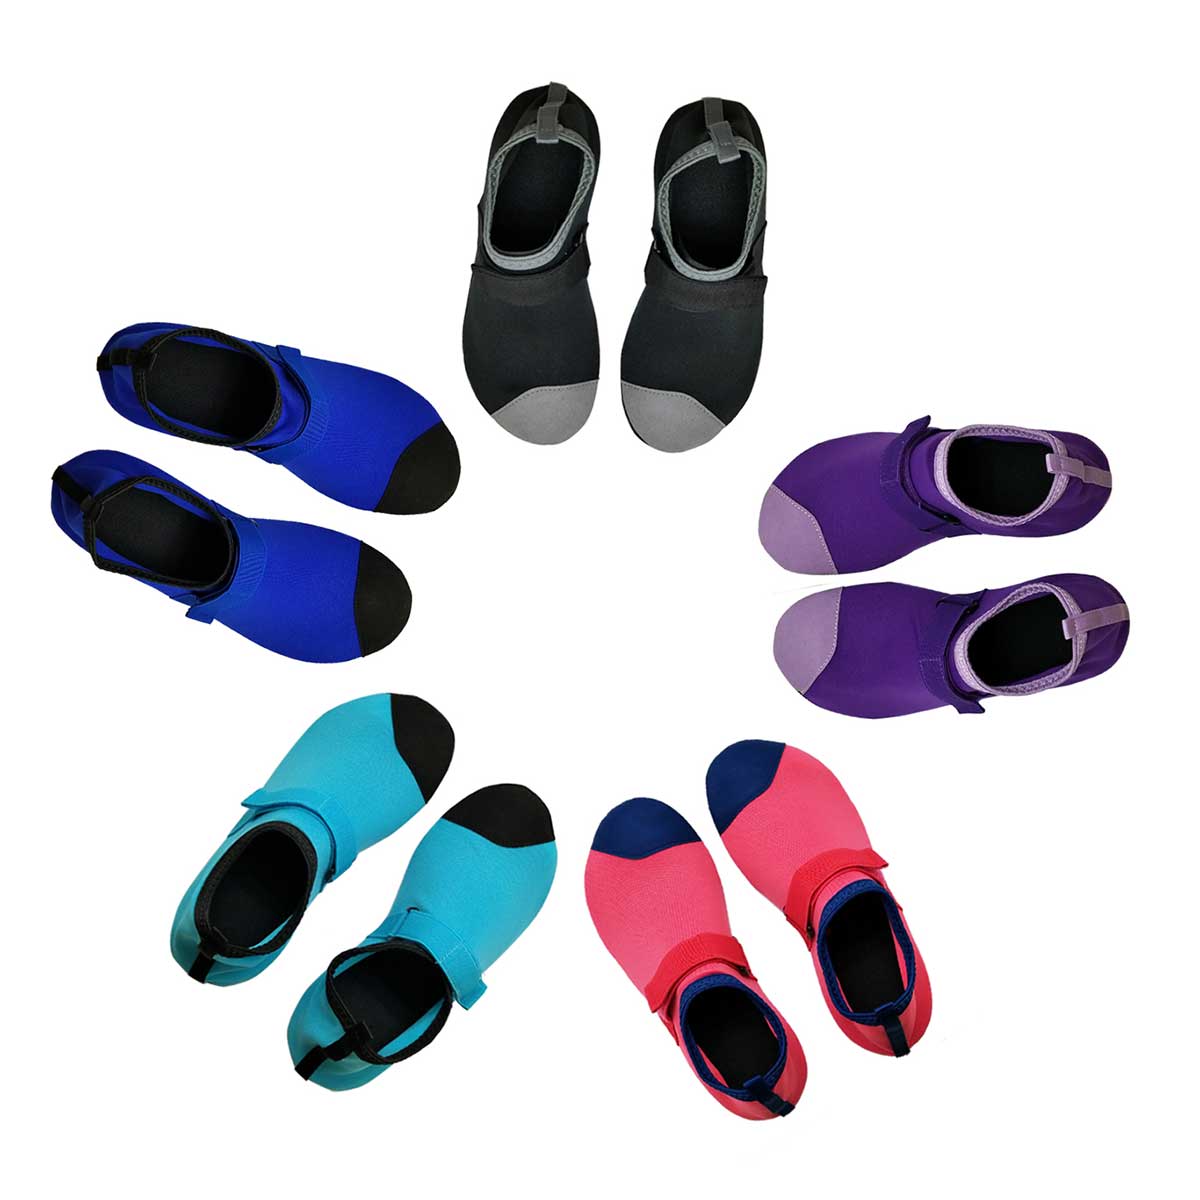 Wholesale Water Sport Shoes Package Deal (96 x Pairs)